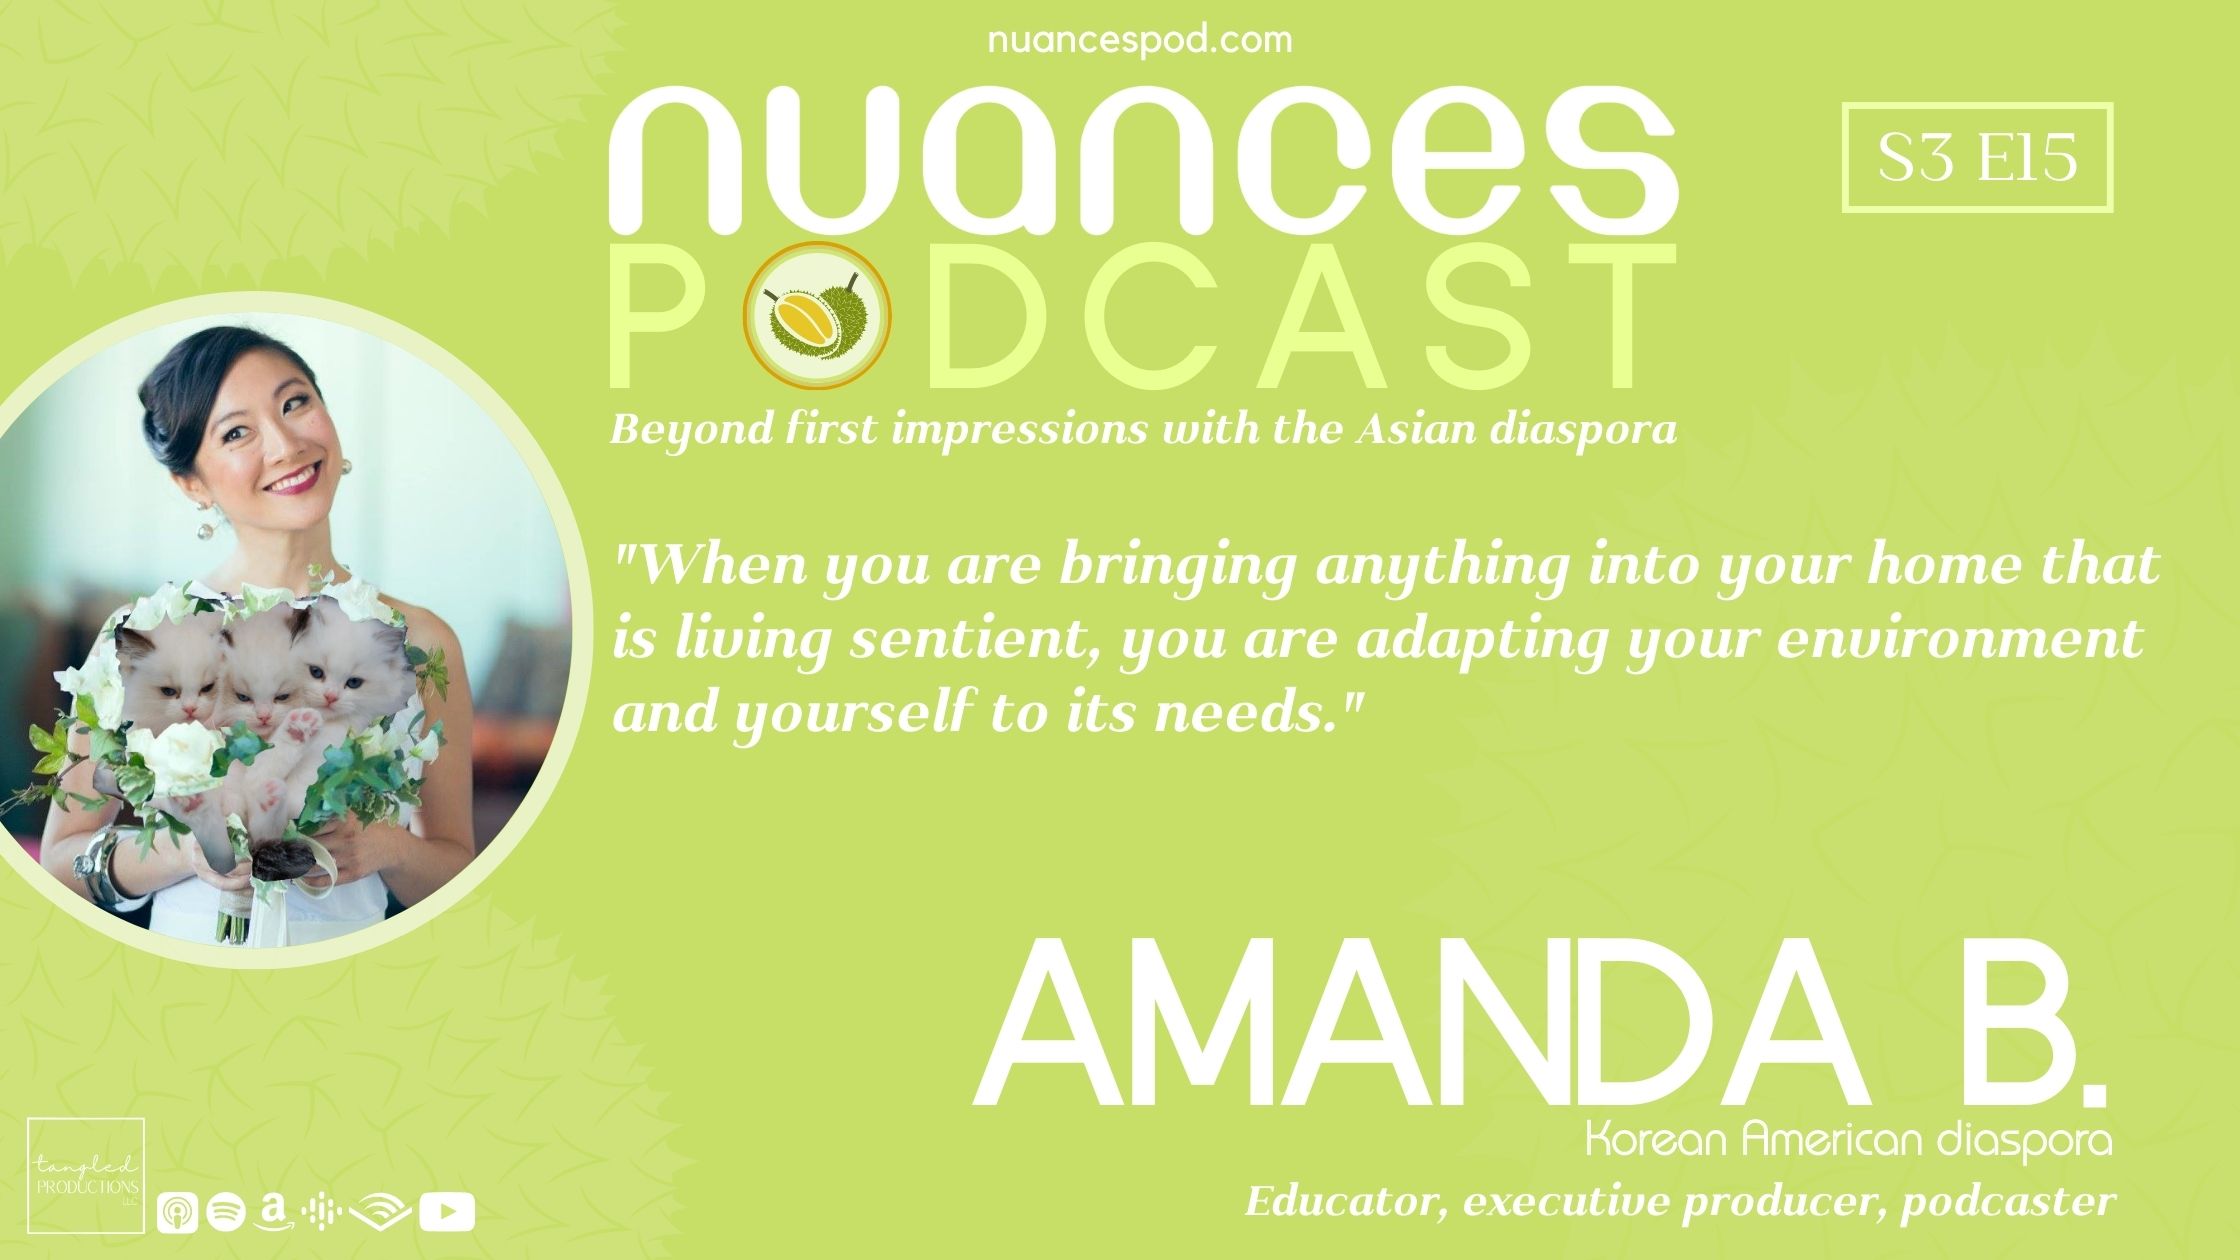 Amanda B. on 6 Degrees of Cats, gender-based violence prevention, and her experience as a transnational & transracial adoptee.